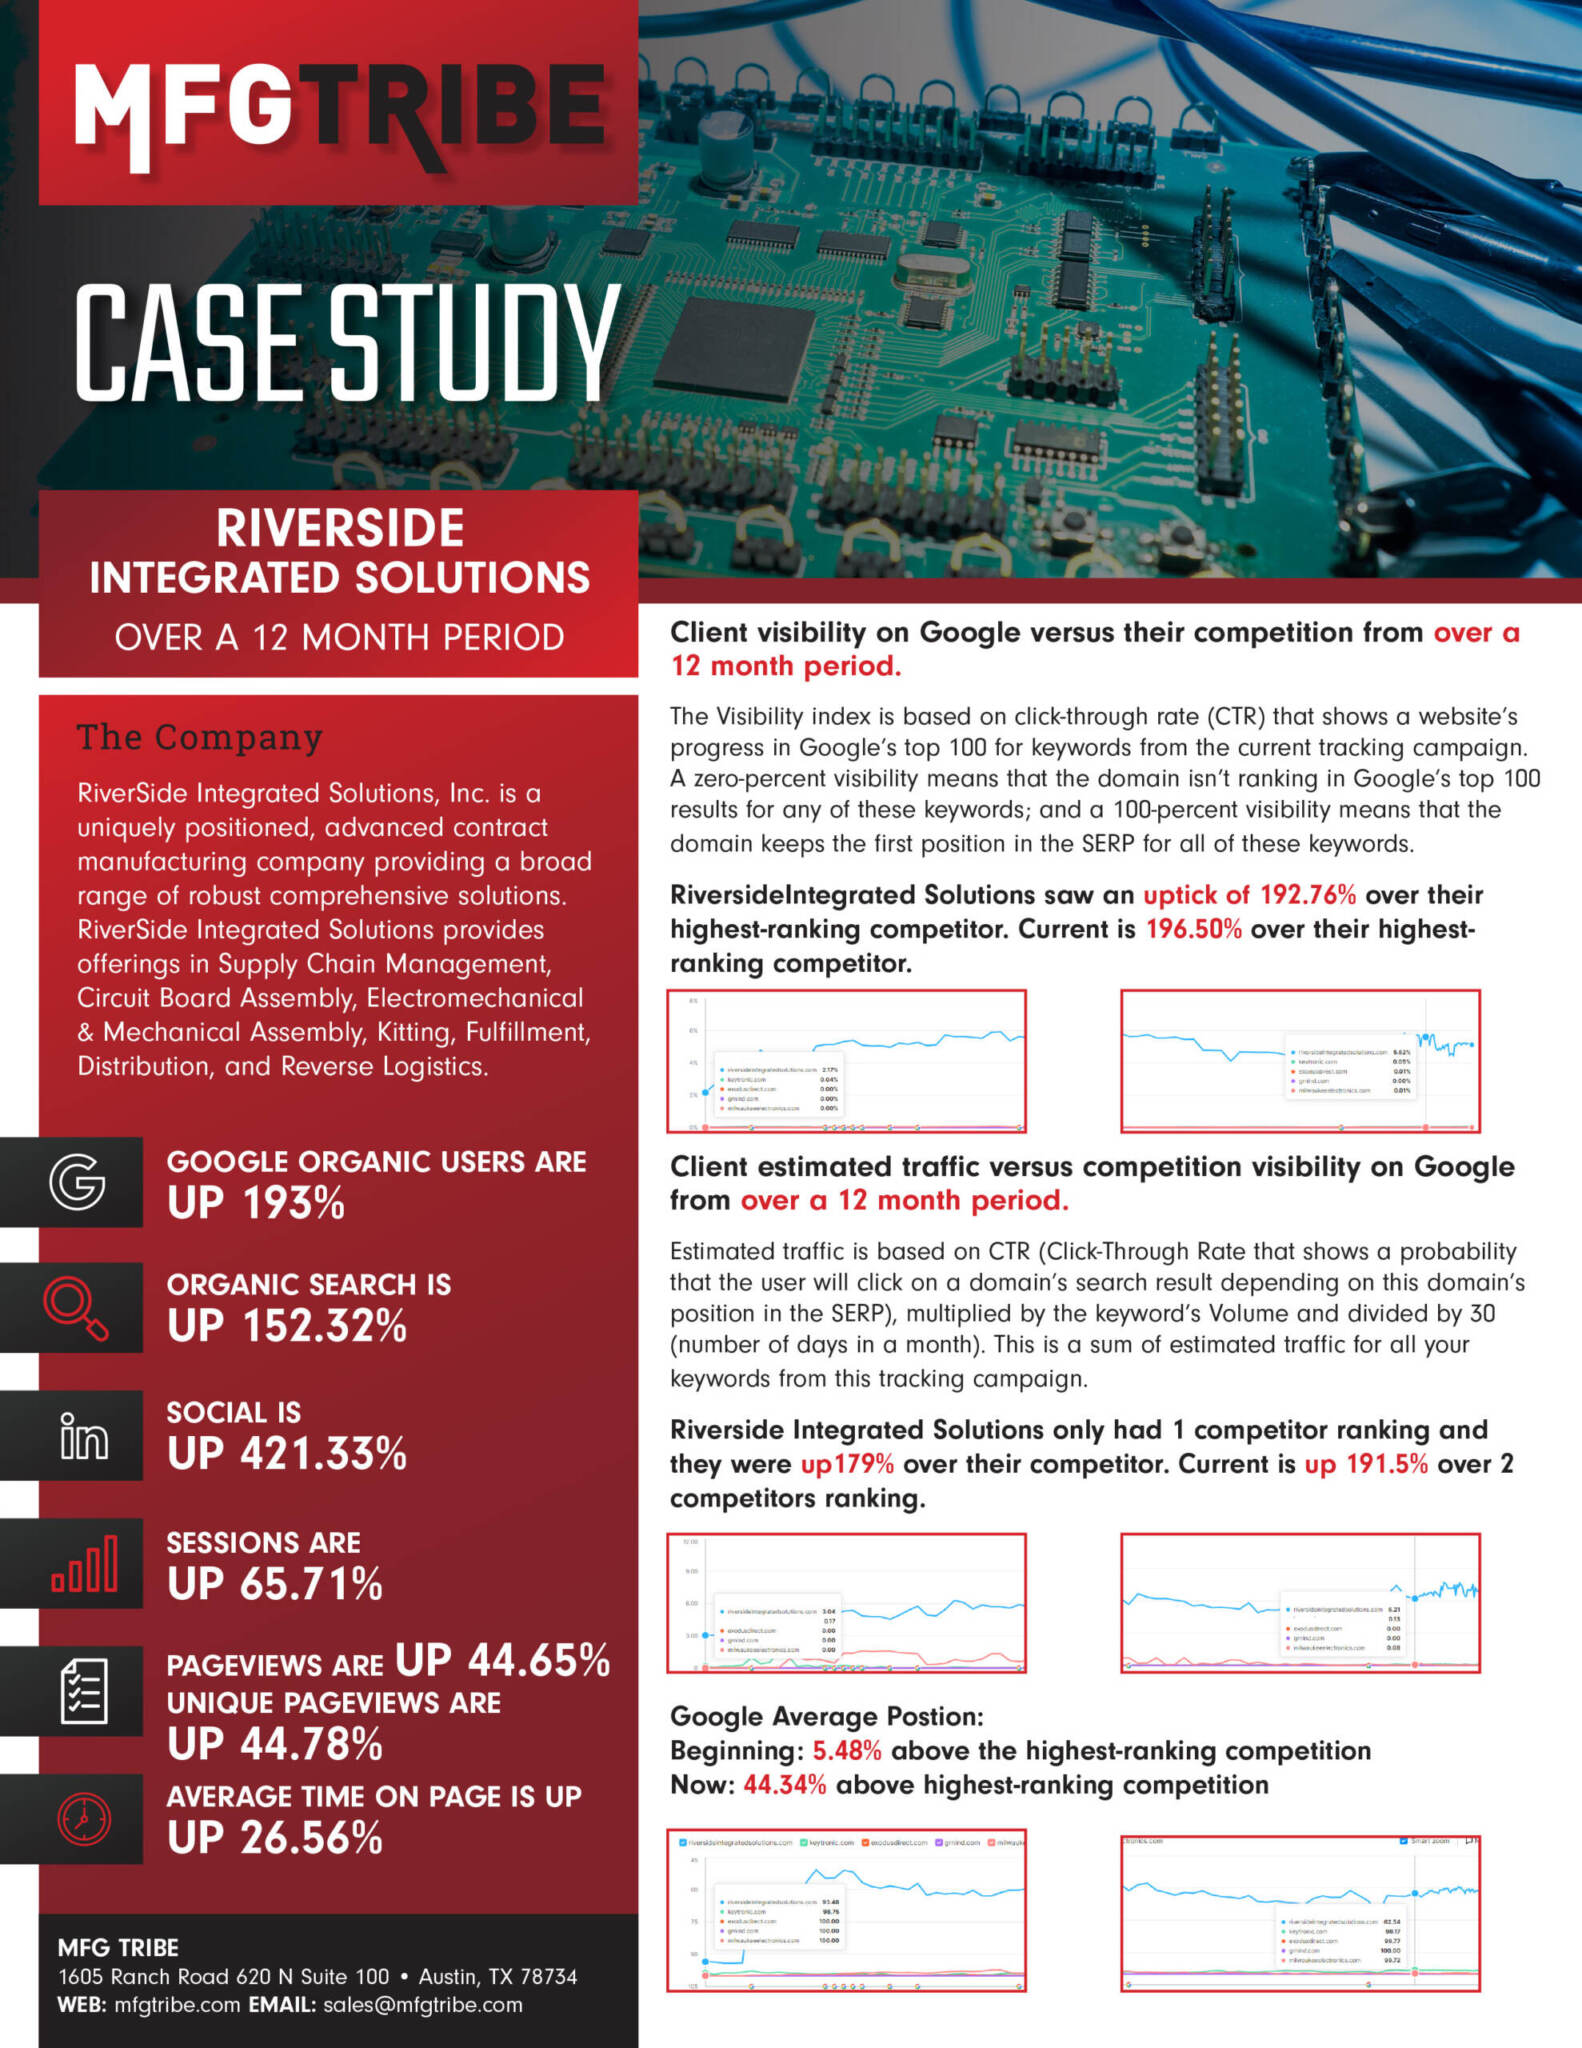 Case study showing industrial marketing efforts for Riverside Integrated Solutions